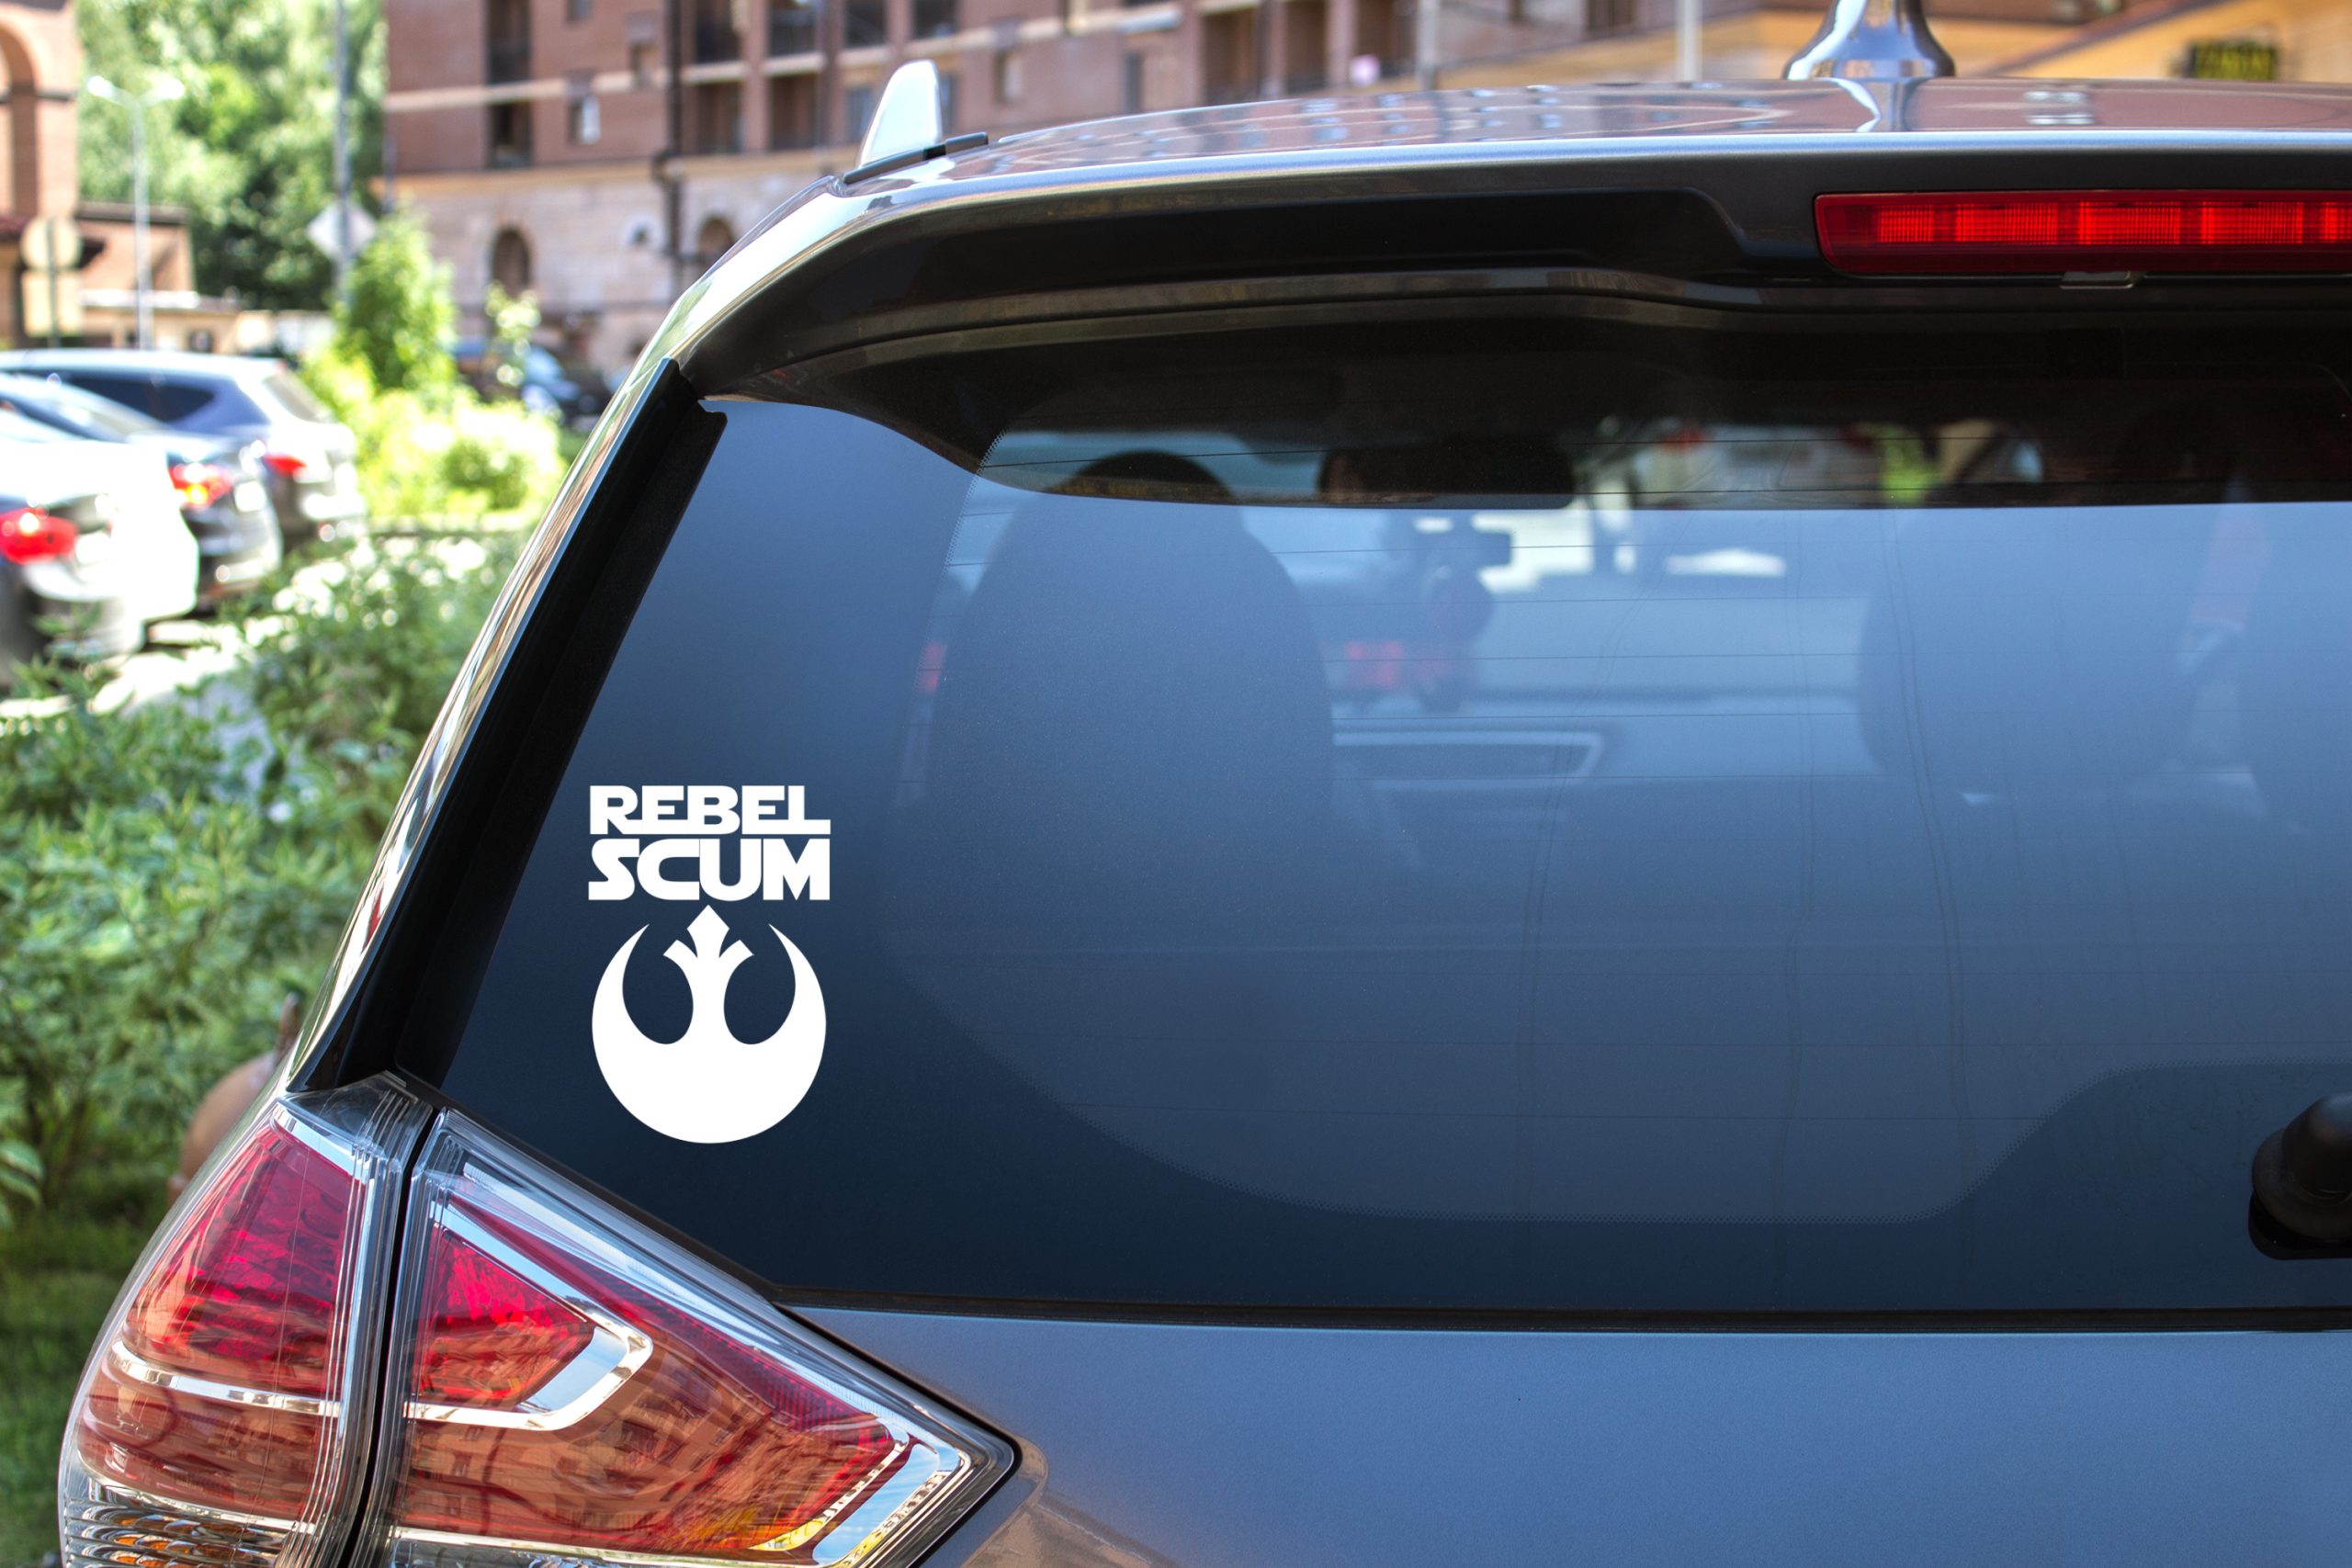 Rebel Scum decal on the rear window of a SUV